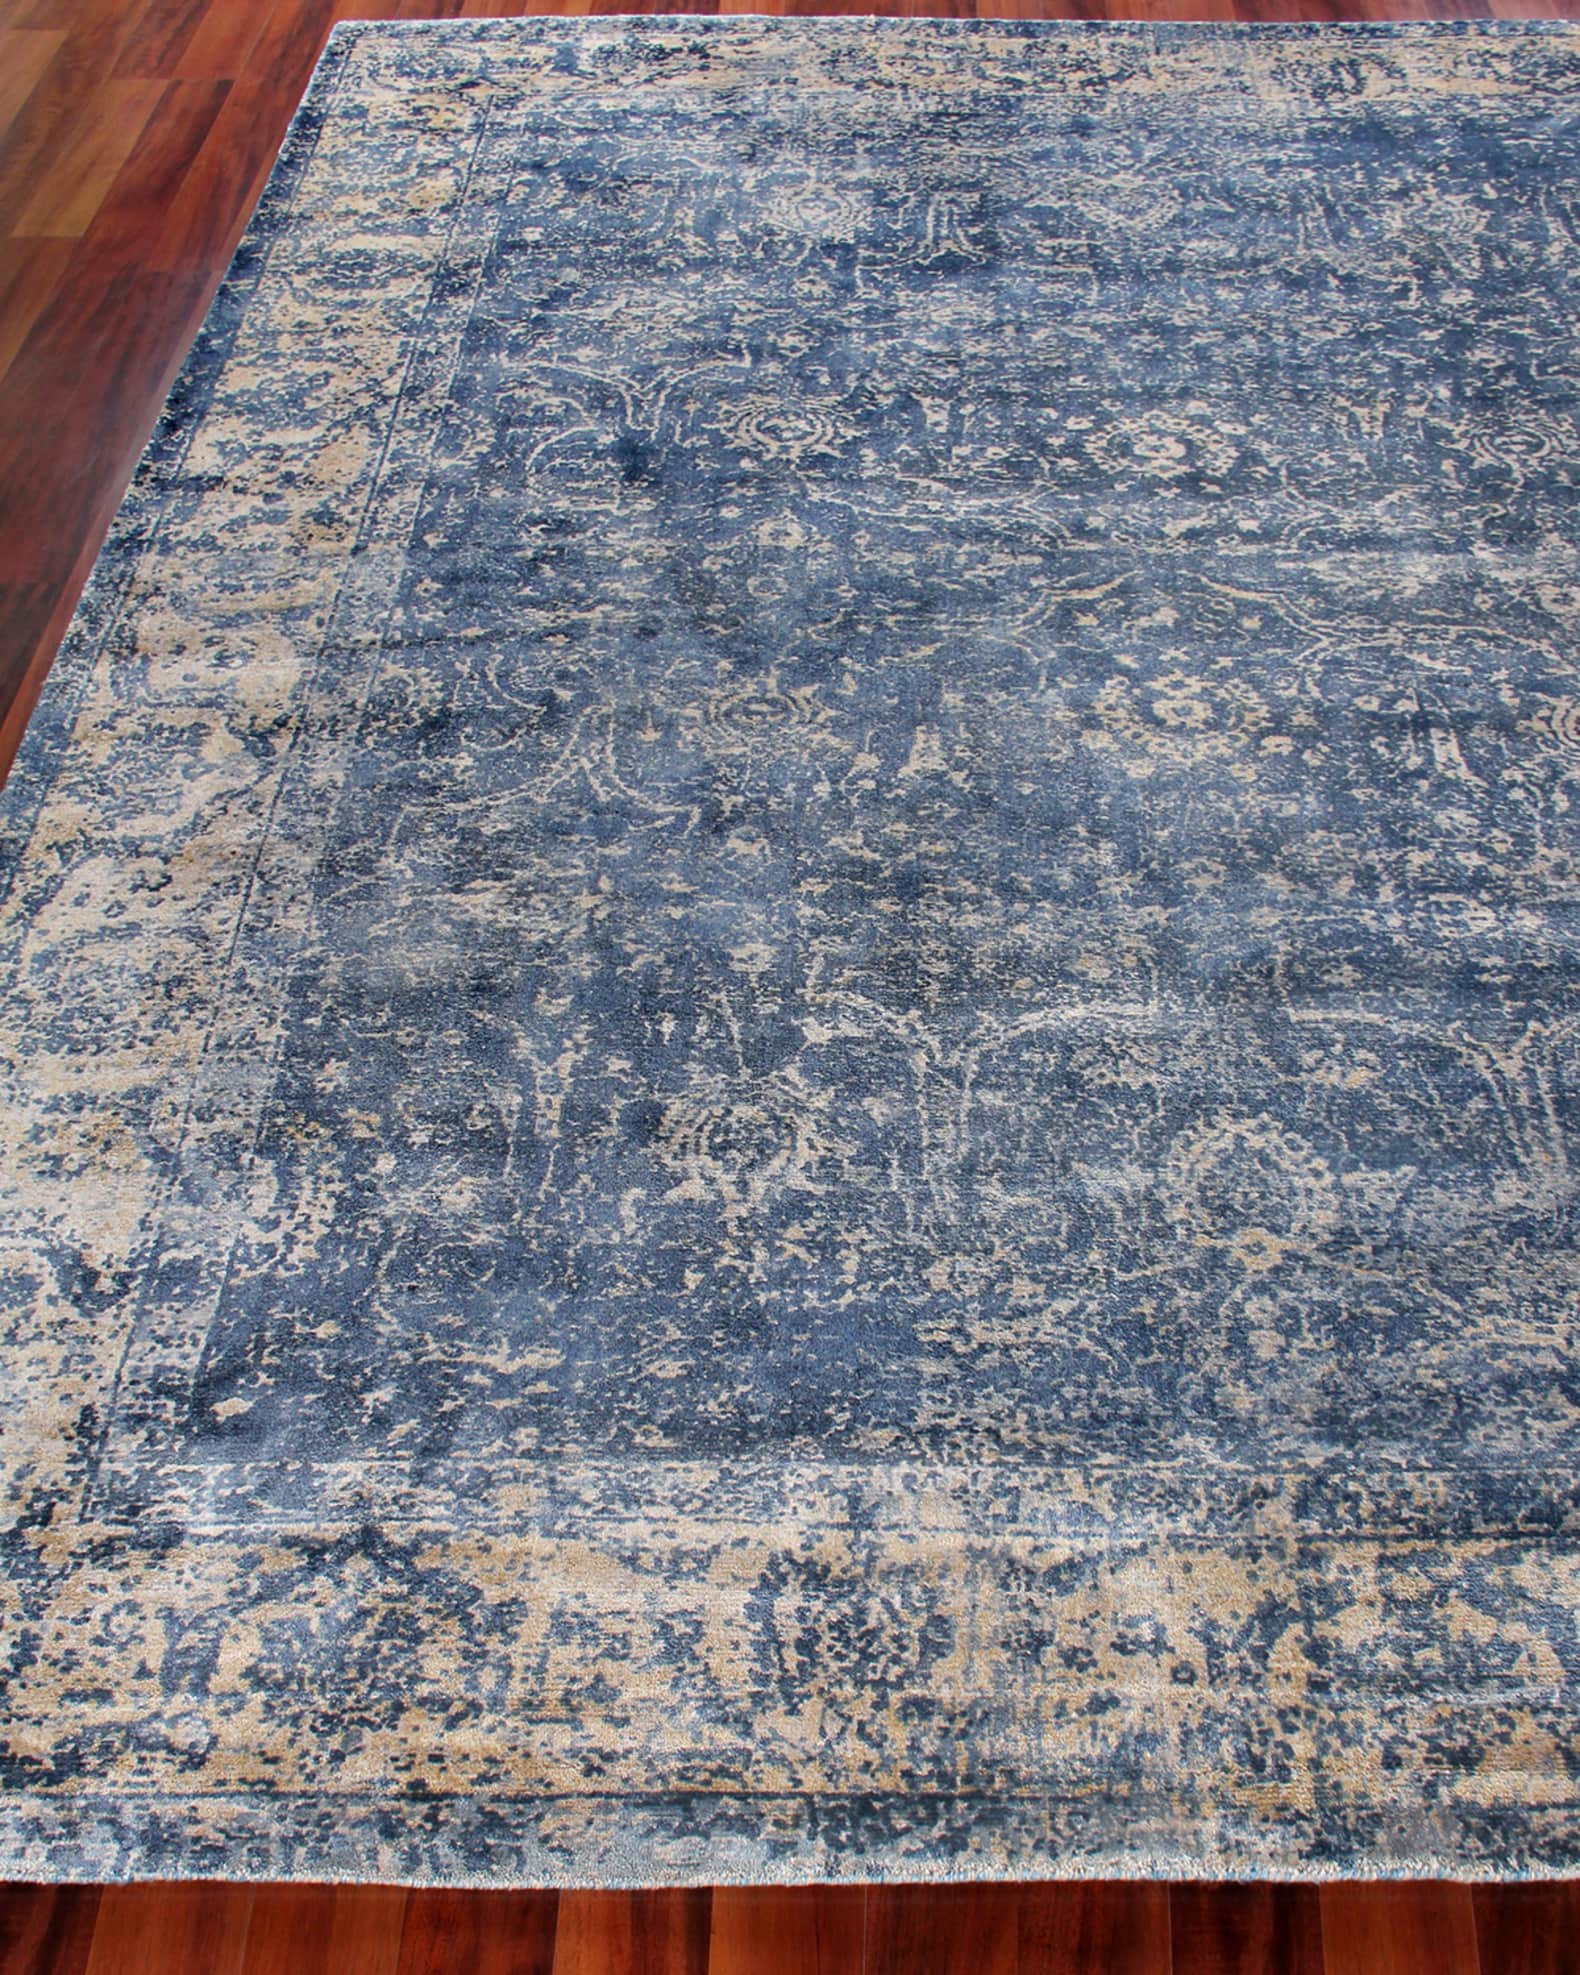 Exquisite Rugs Adelaide Hand-Knotted Rug, 9' x 12'